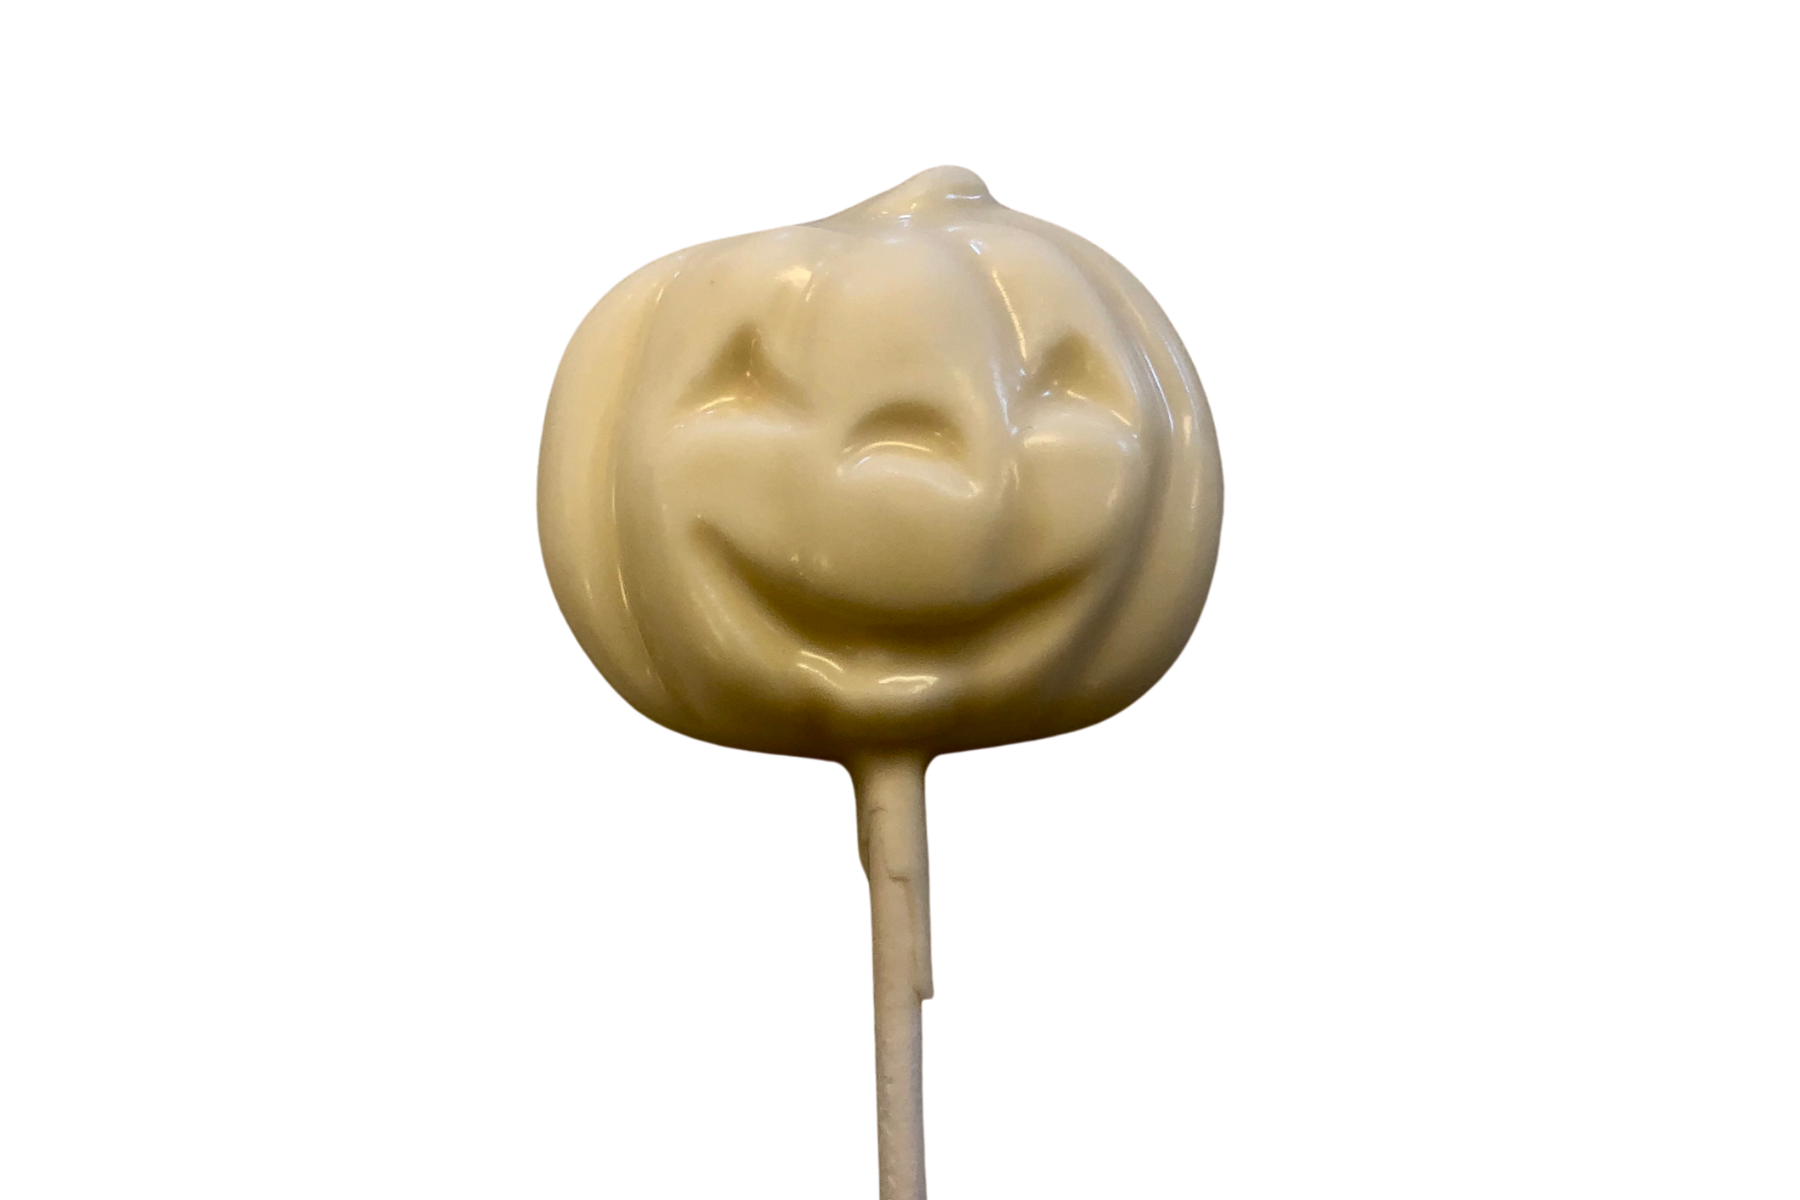 Delight in the sweetness of our White Chocolate Smiling Pumpkin Pop on a festive stick – a creamy and festive treat perfect for Halloween celebrations!